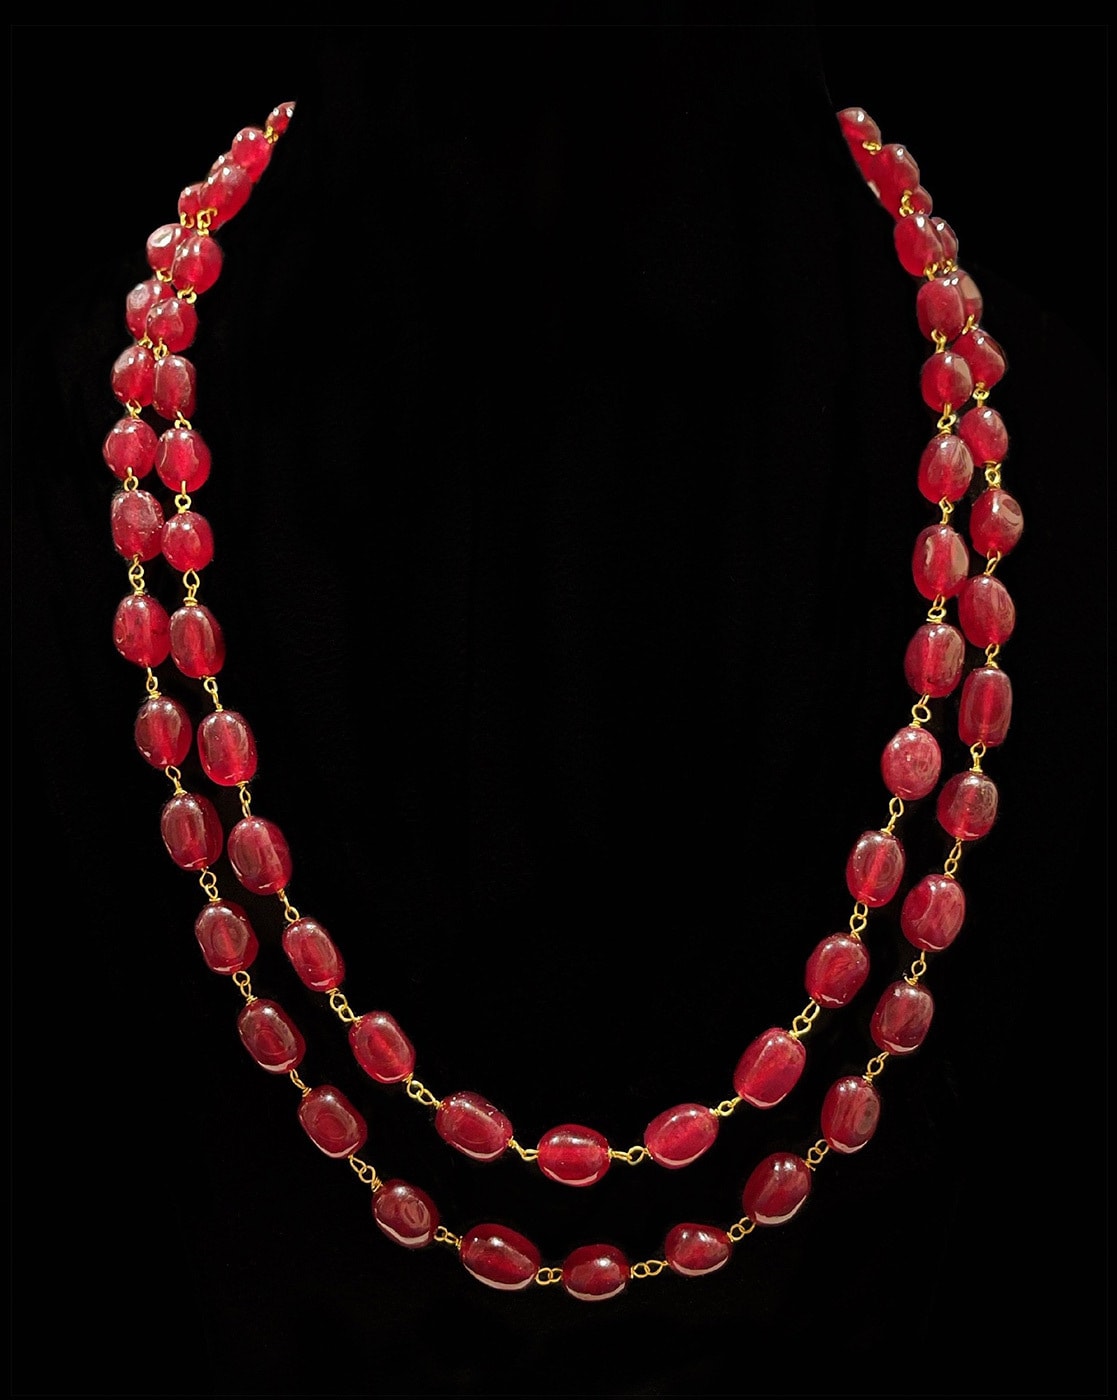 Wondrously Woven Red Necklace - Jewelry by Bretta